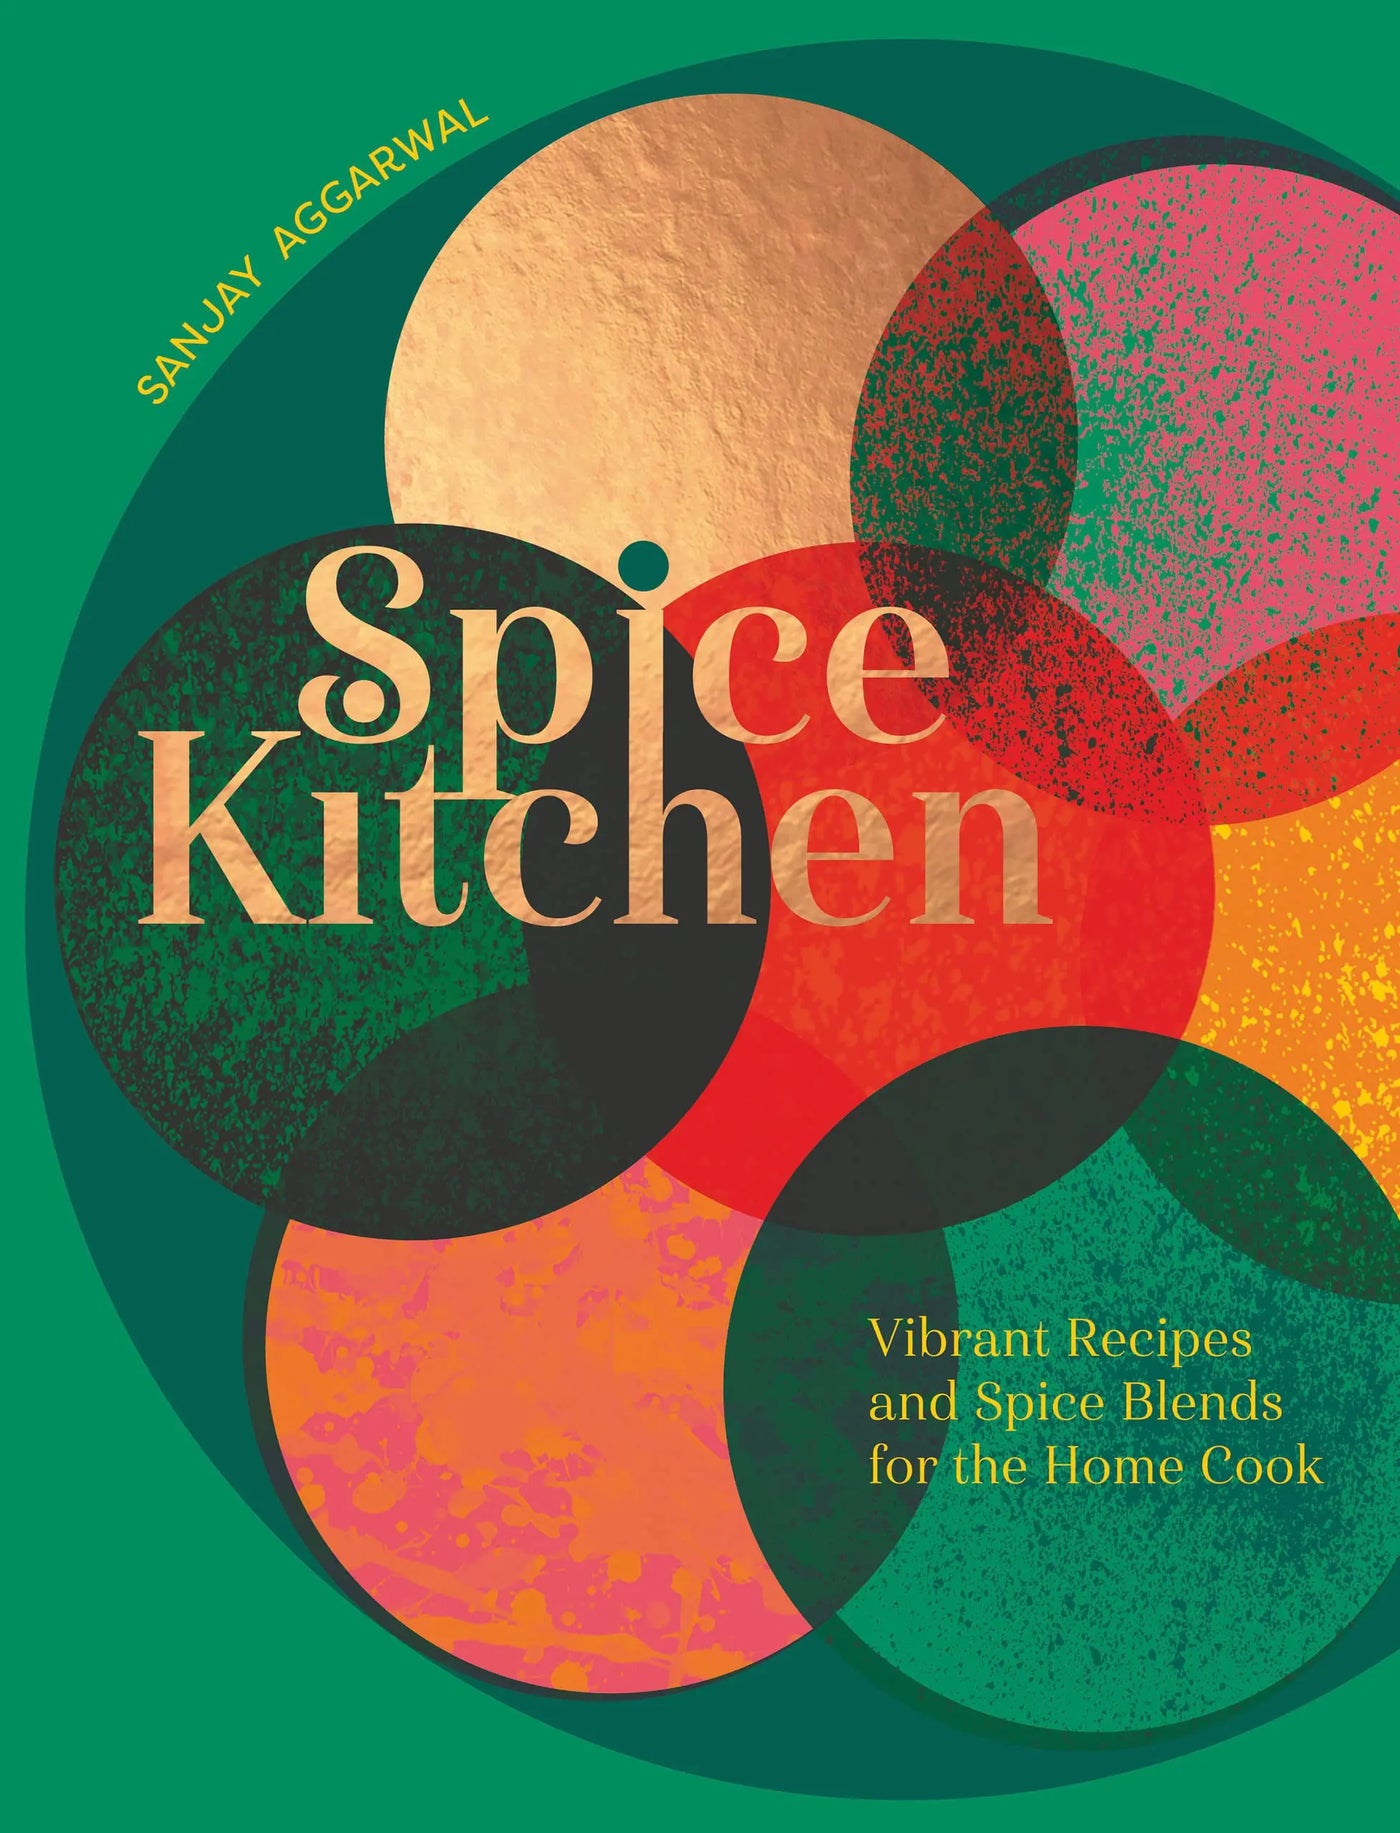 Spice Kitchen: Vibrant Recipes And Spice Blends For The Home Cook Hardcover (Signed) - Migration Museum Shop